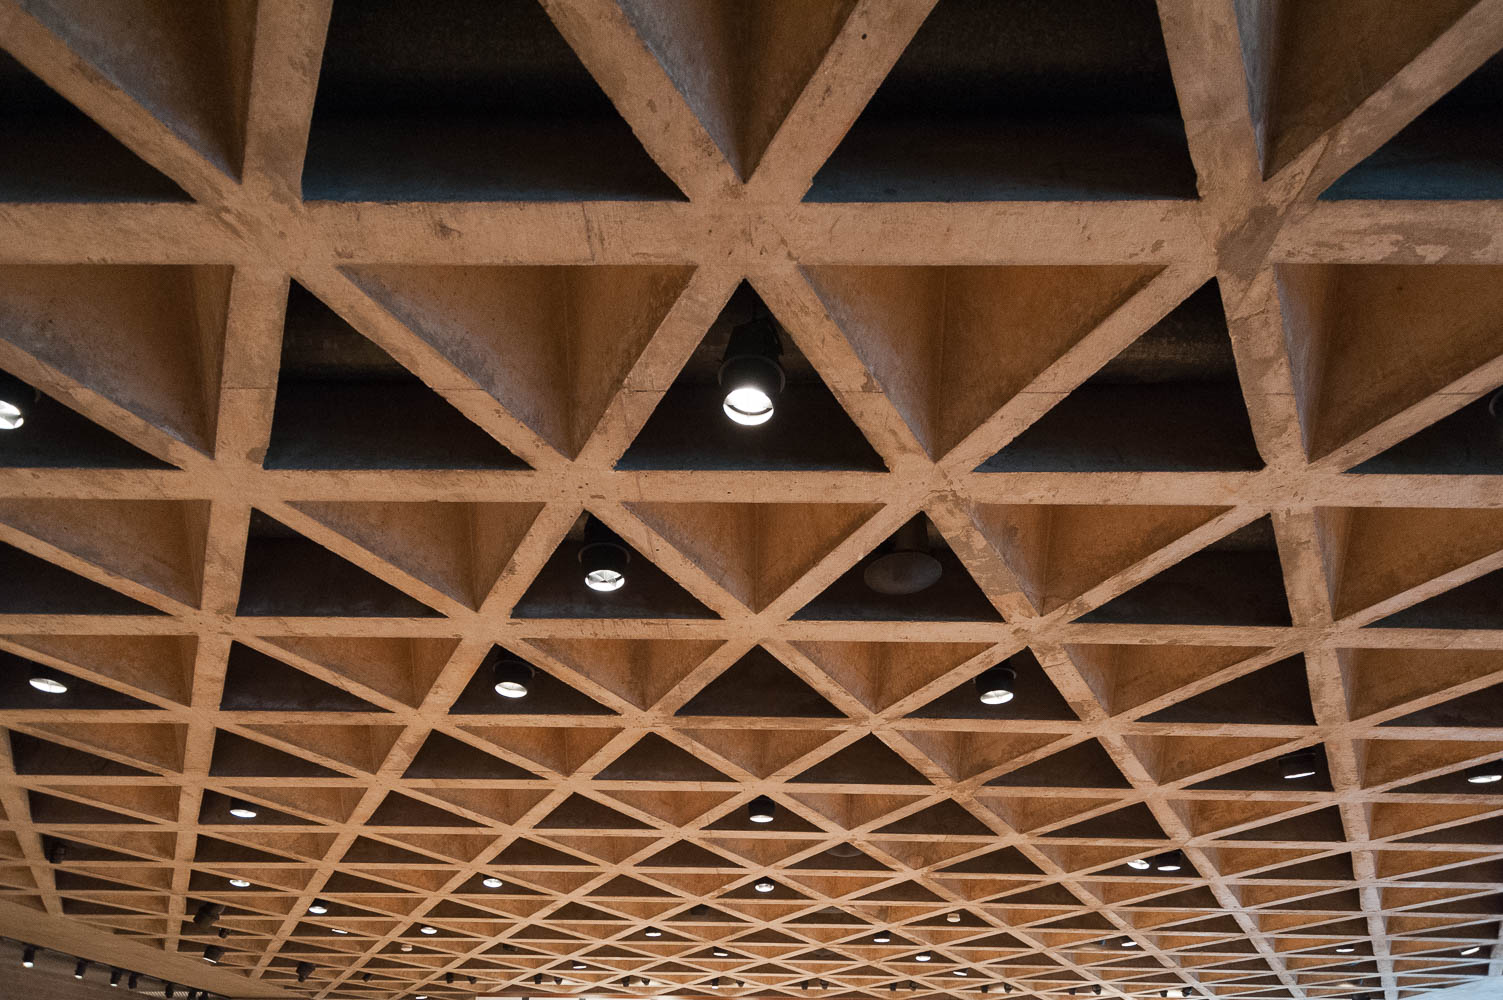 A view of a concrete ceiling with recessed track lighting. The ceiling is shaped as a series of tetrahedra.